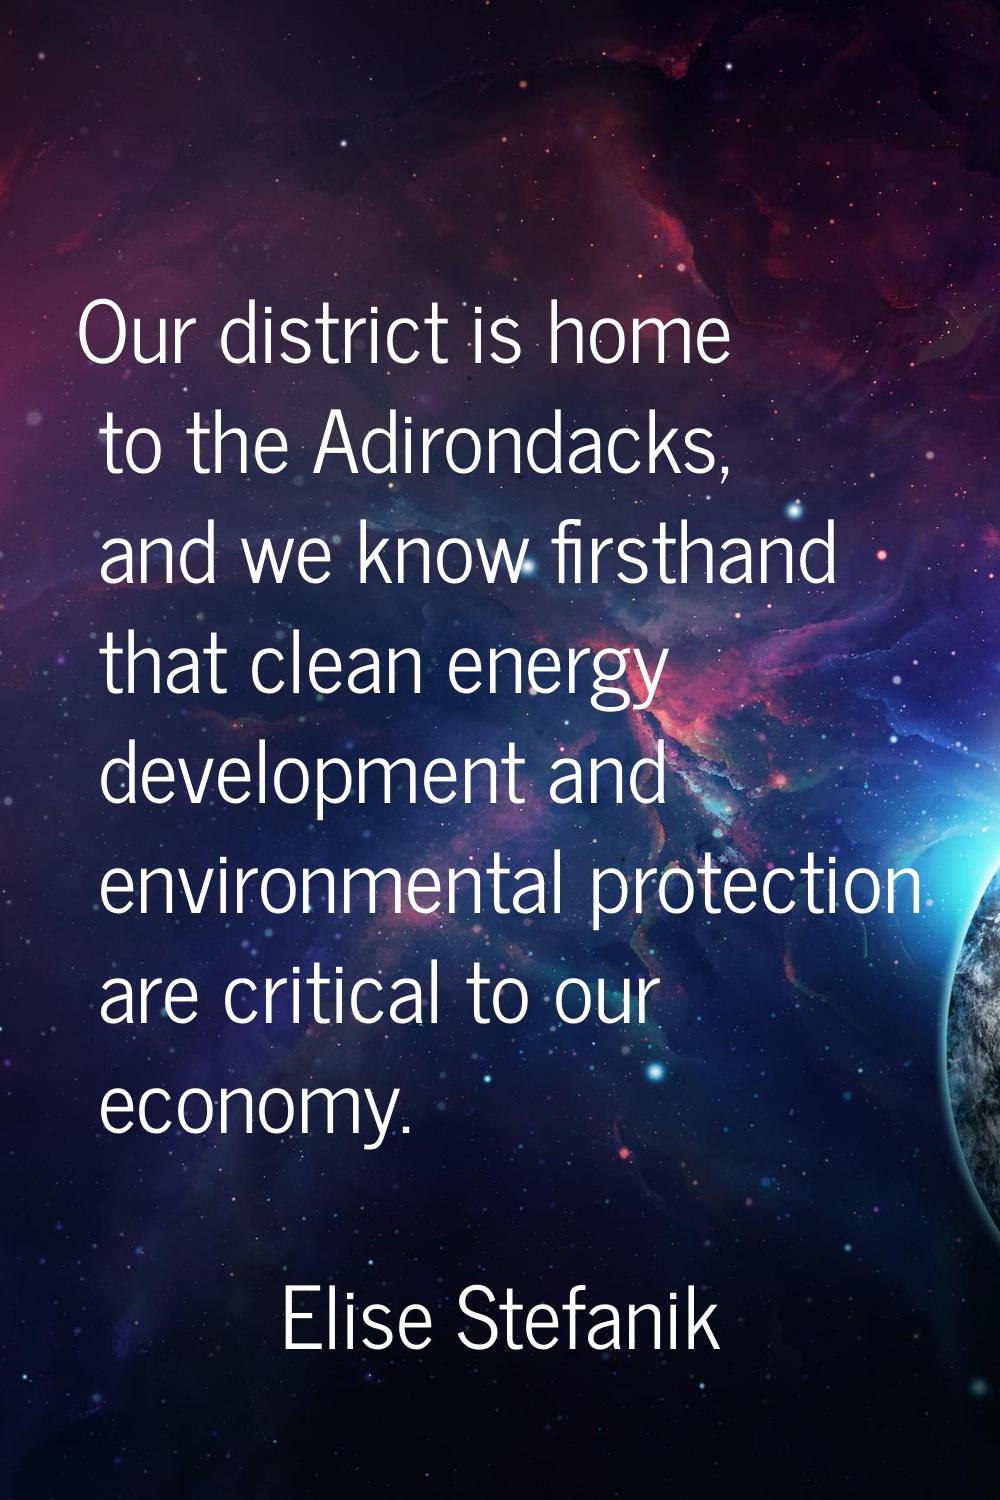 Our district is home to the Adirondacks, and we know firsthand that clean energy development and en